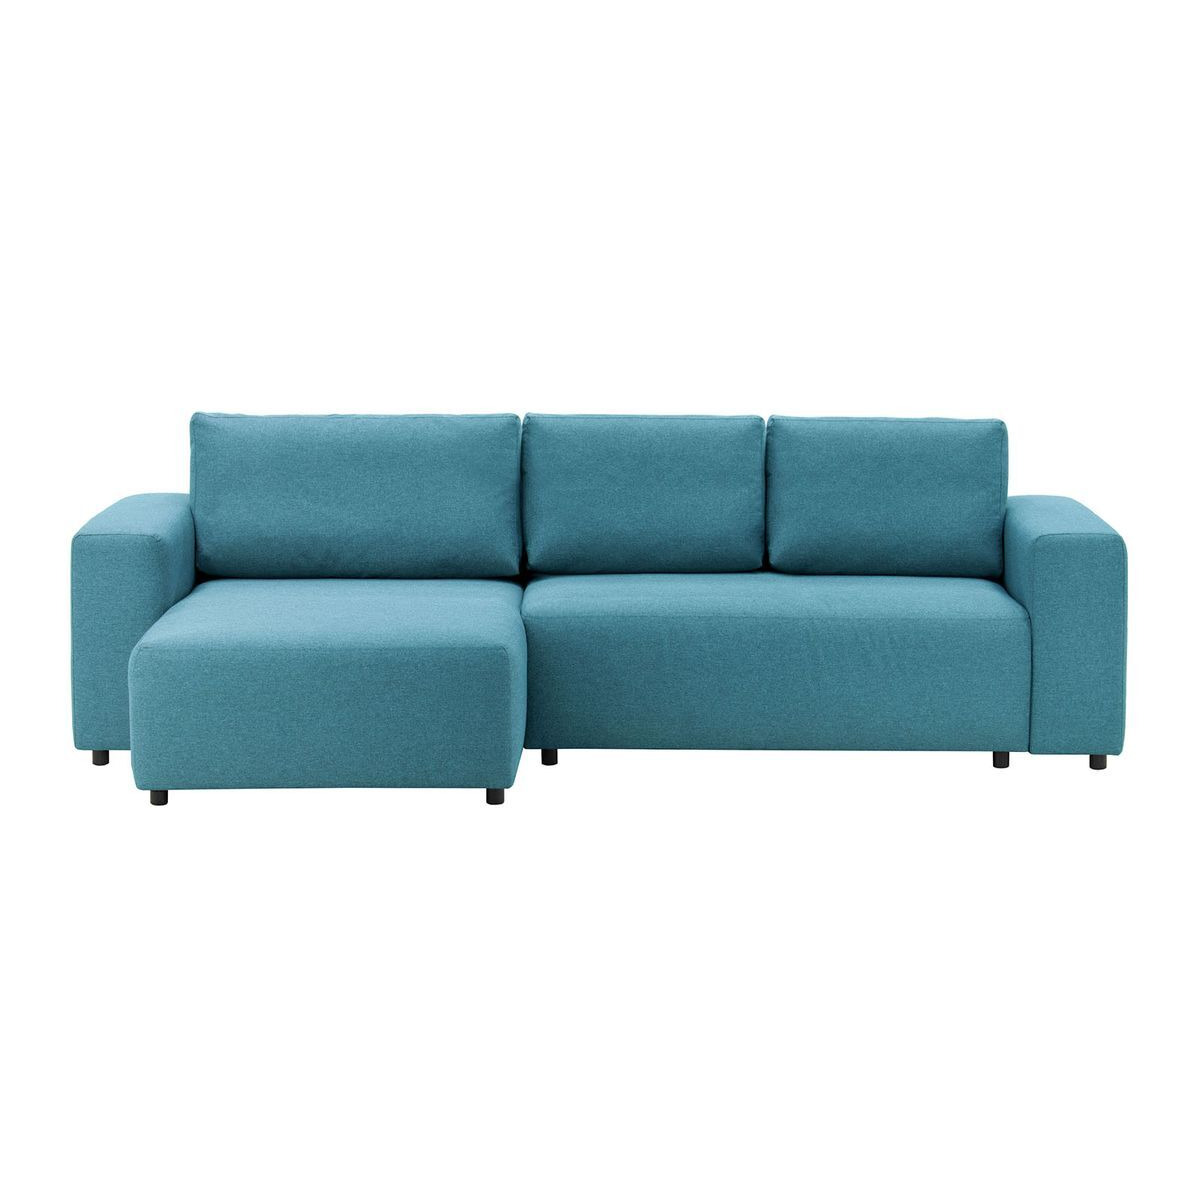 Solace Left Hand Corner Sofa Bed, turquoise - image 1